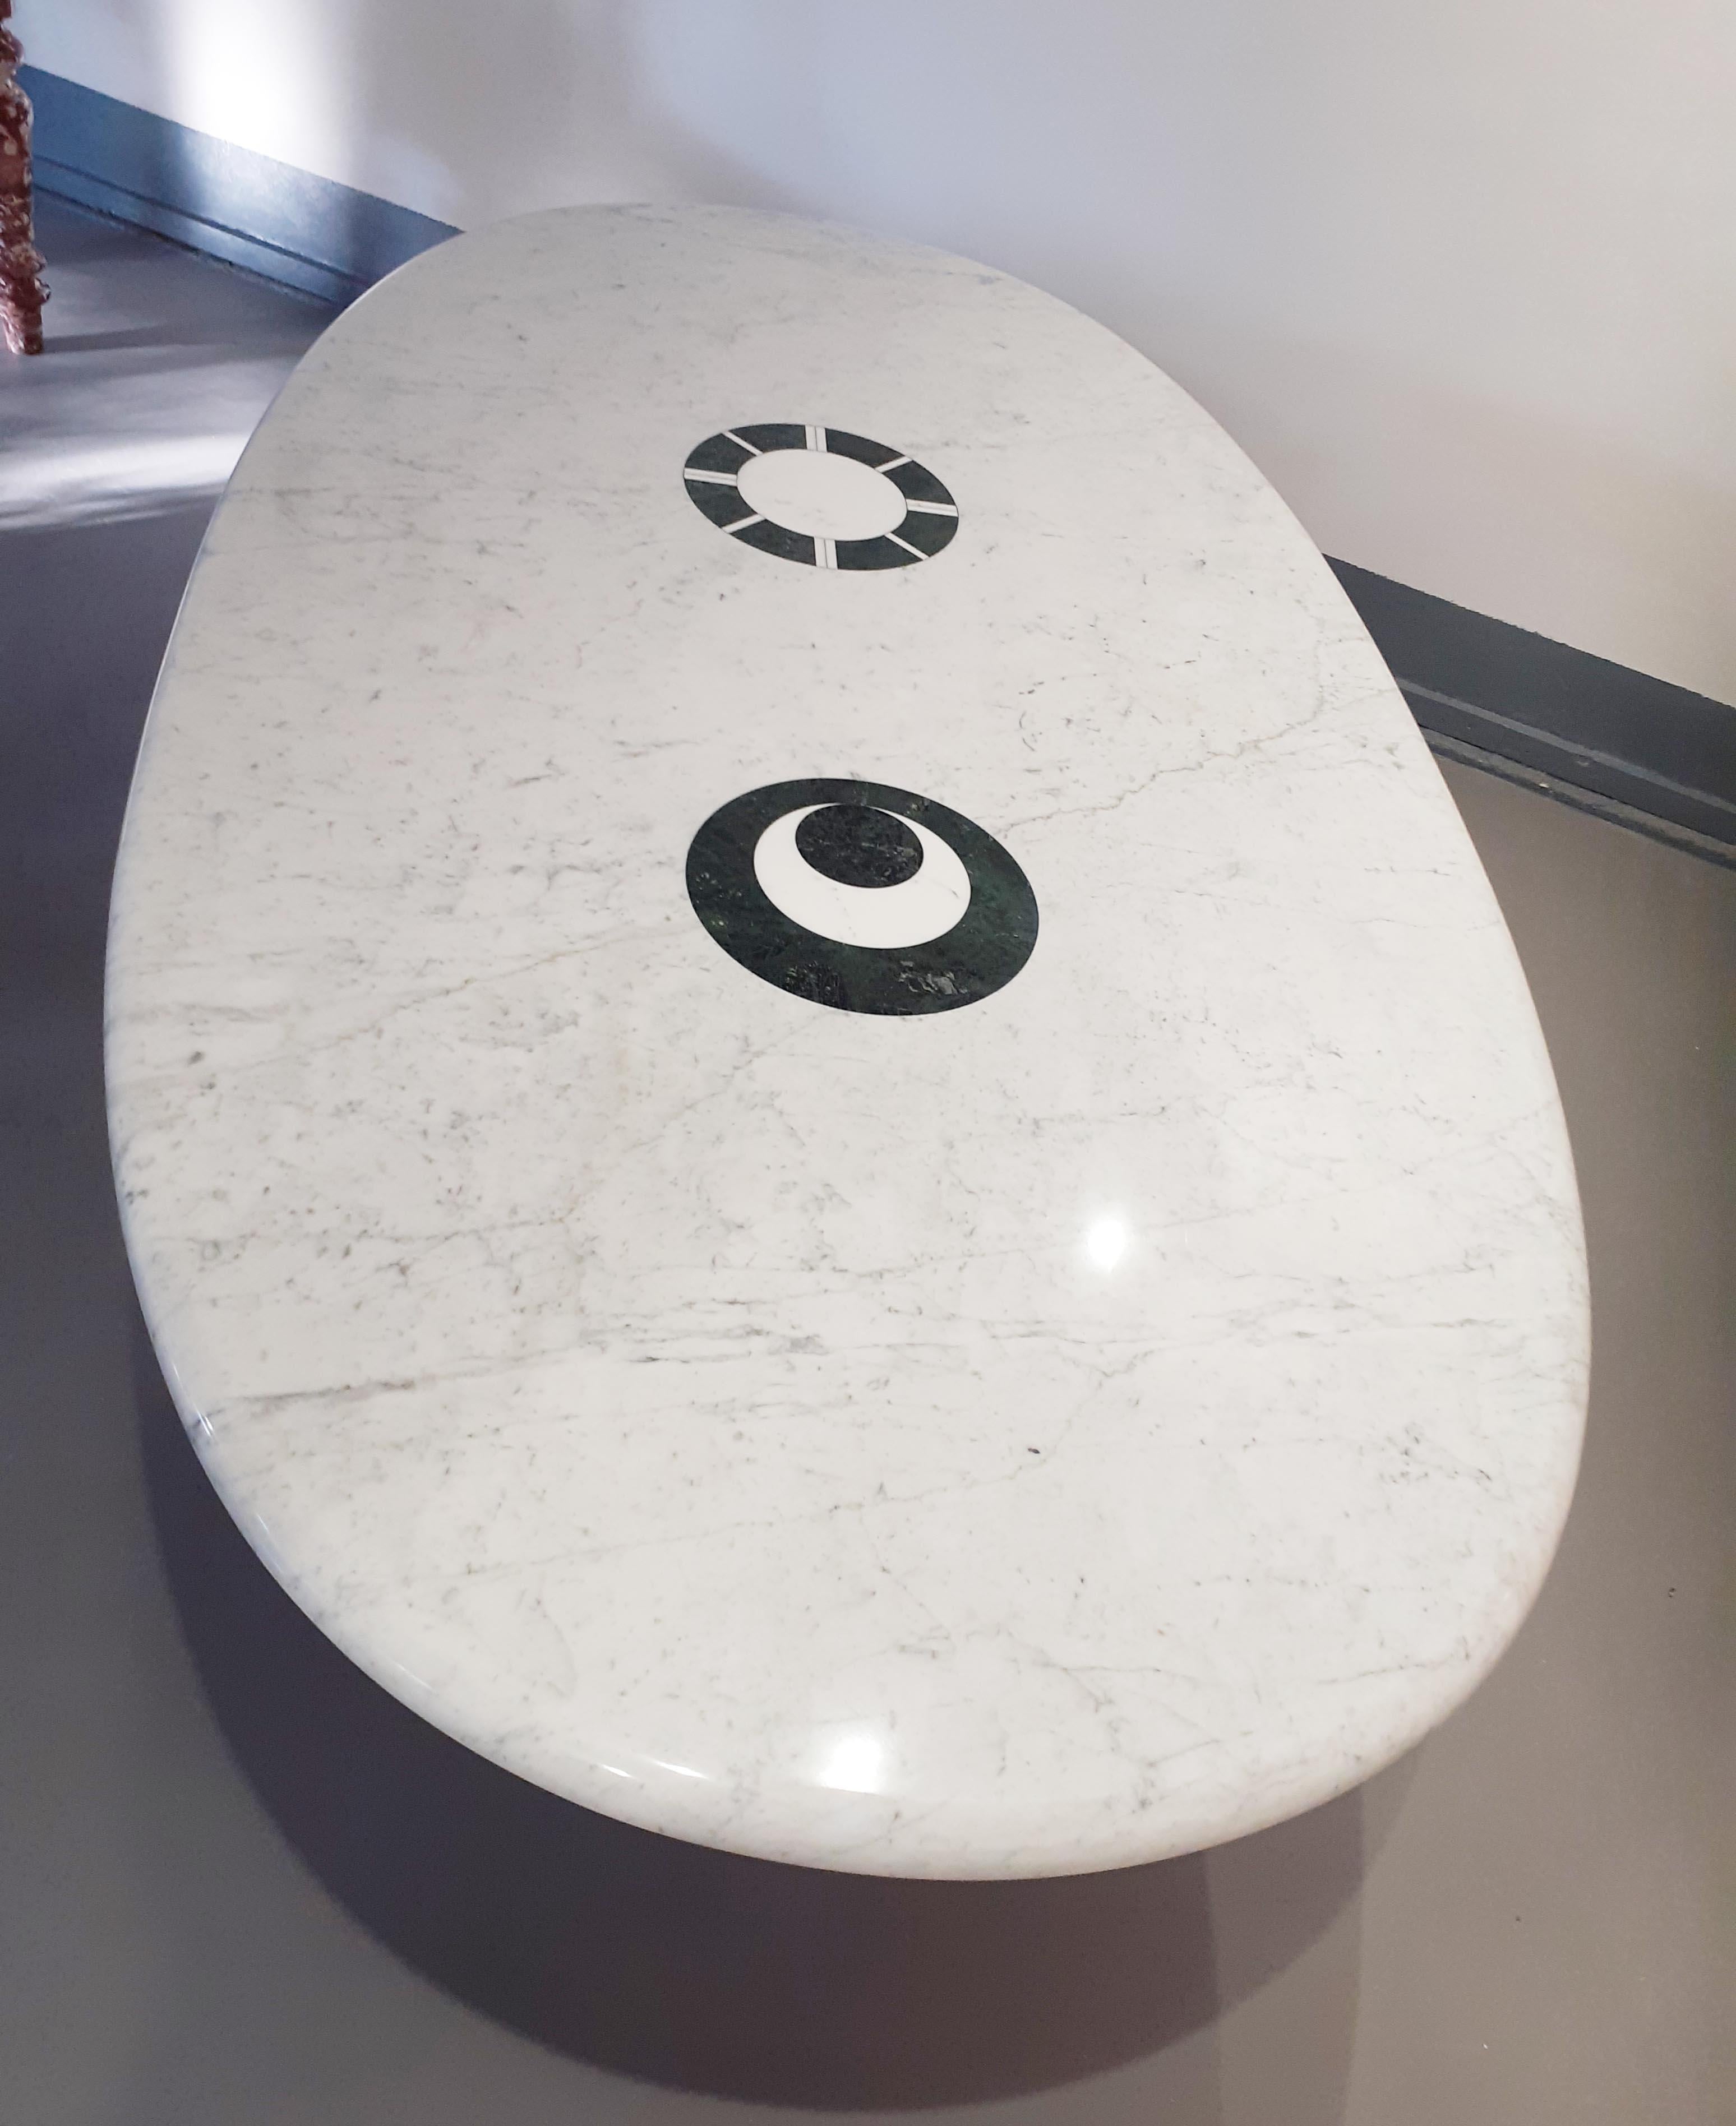 Marble table designed by Adolfo Natalini.
Marble table with polychrome inlay in white and green marble
Size: cm. 200 x 110 x 73 H.
Materials: Bianco Carrara / Calacatta – Verde Alpi
Designed by: Adolfo Natalini.